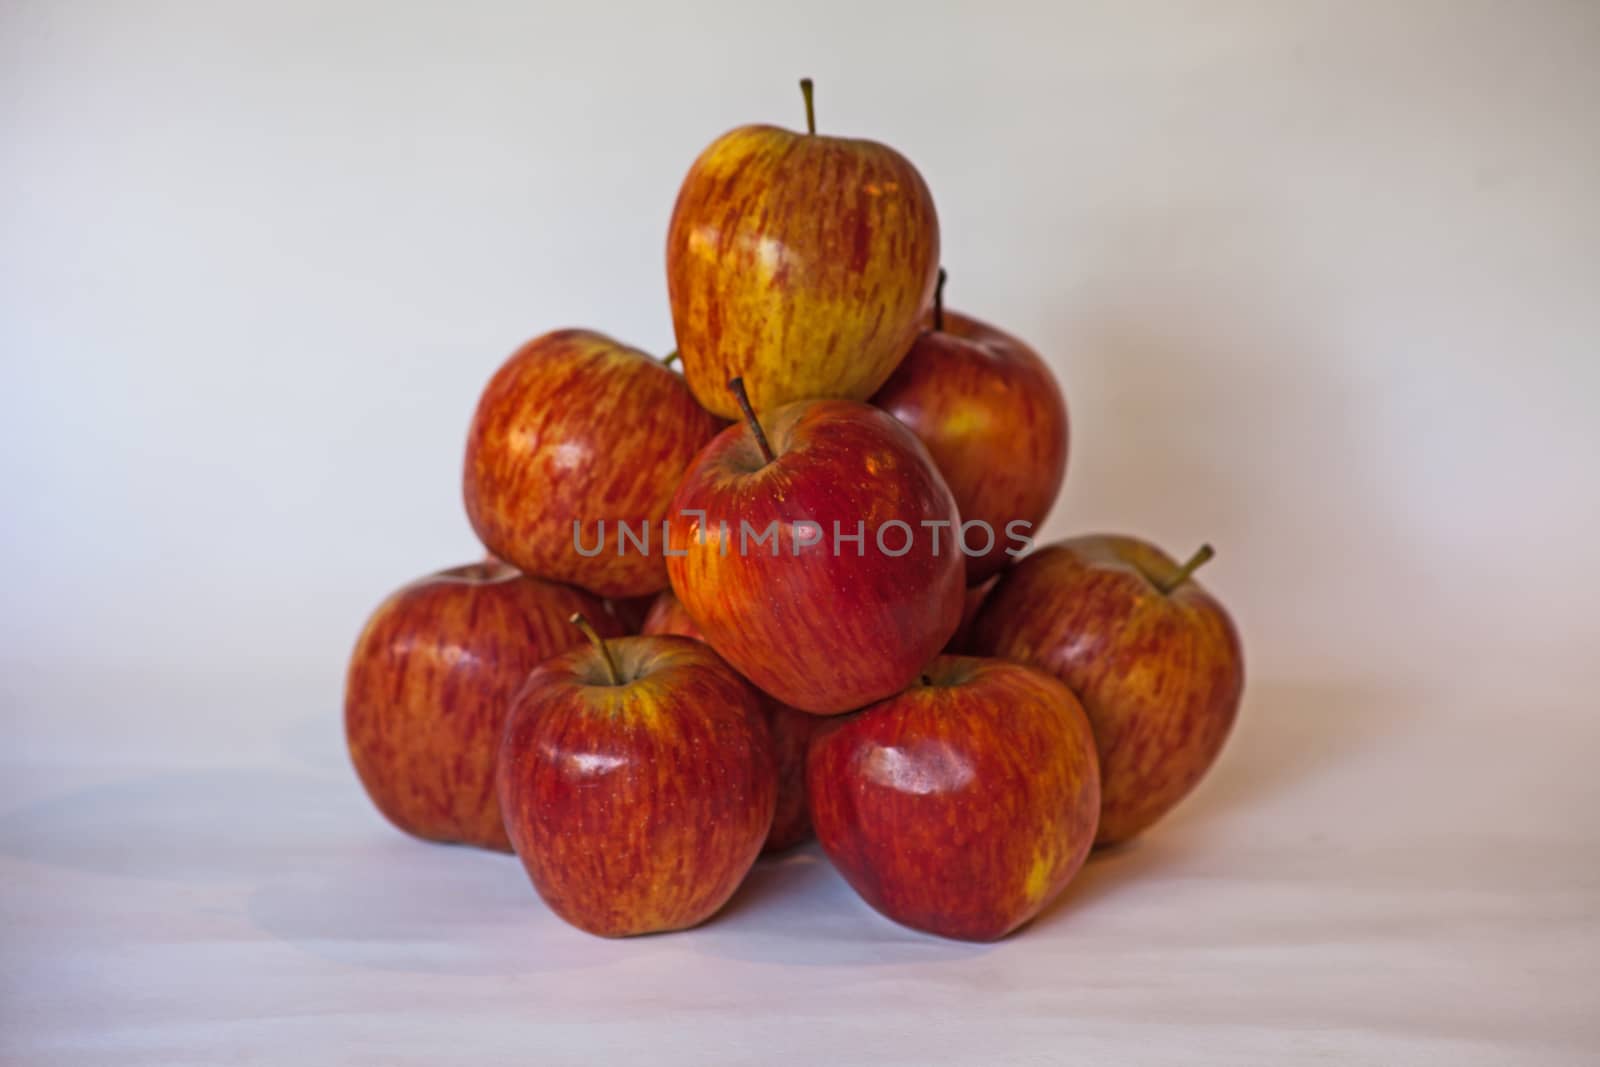 Still life image of stacked red Starking apples.